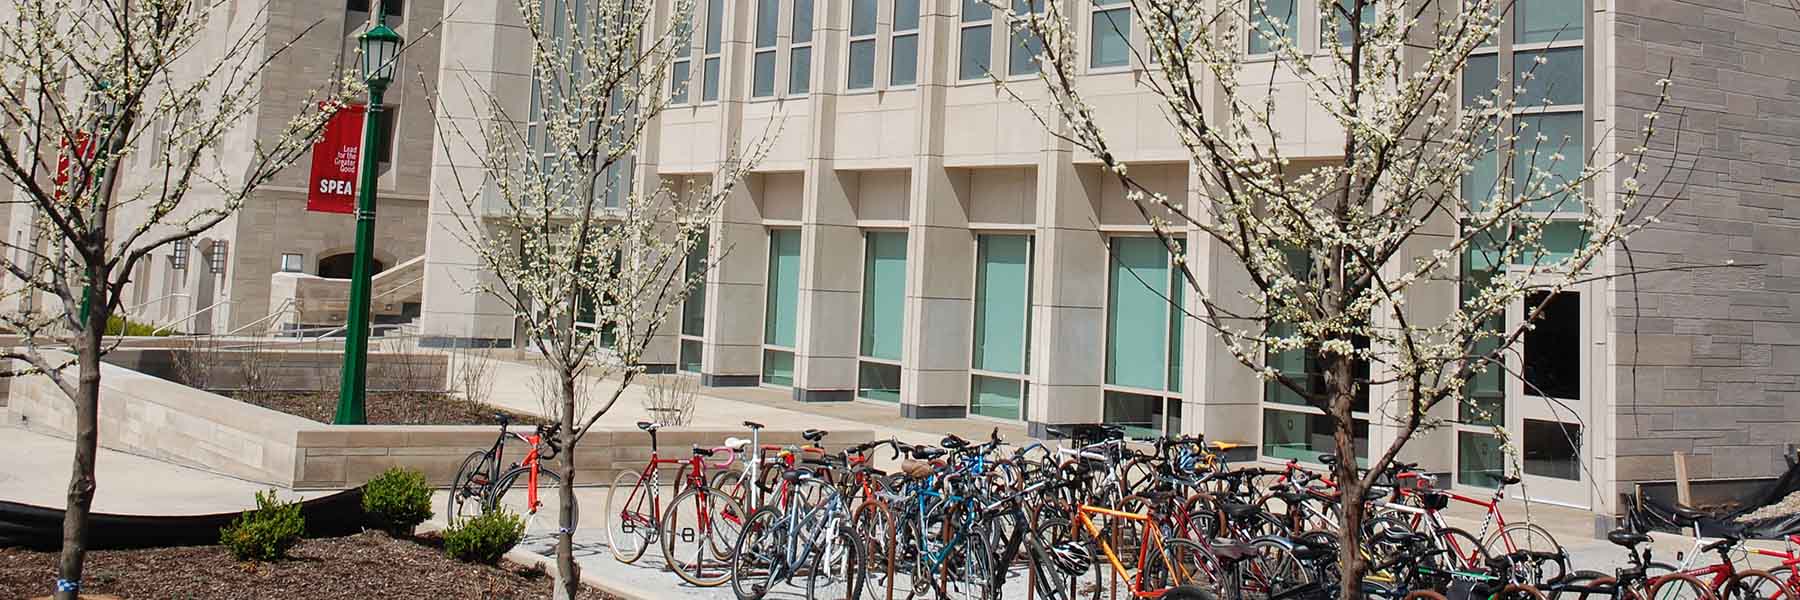 SPEA building in spring with flowering trees and bicycles